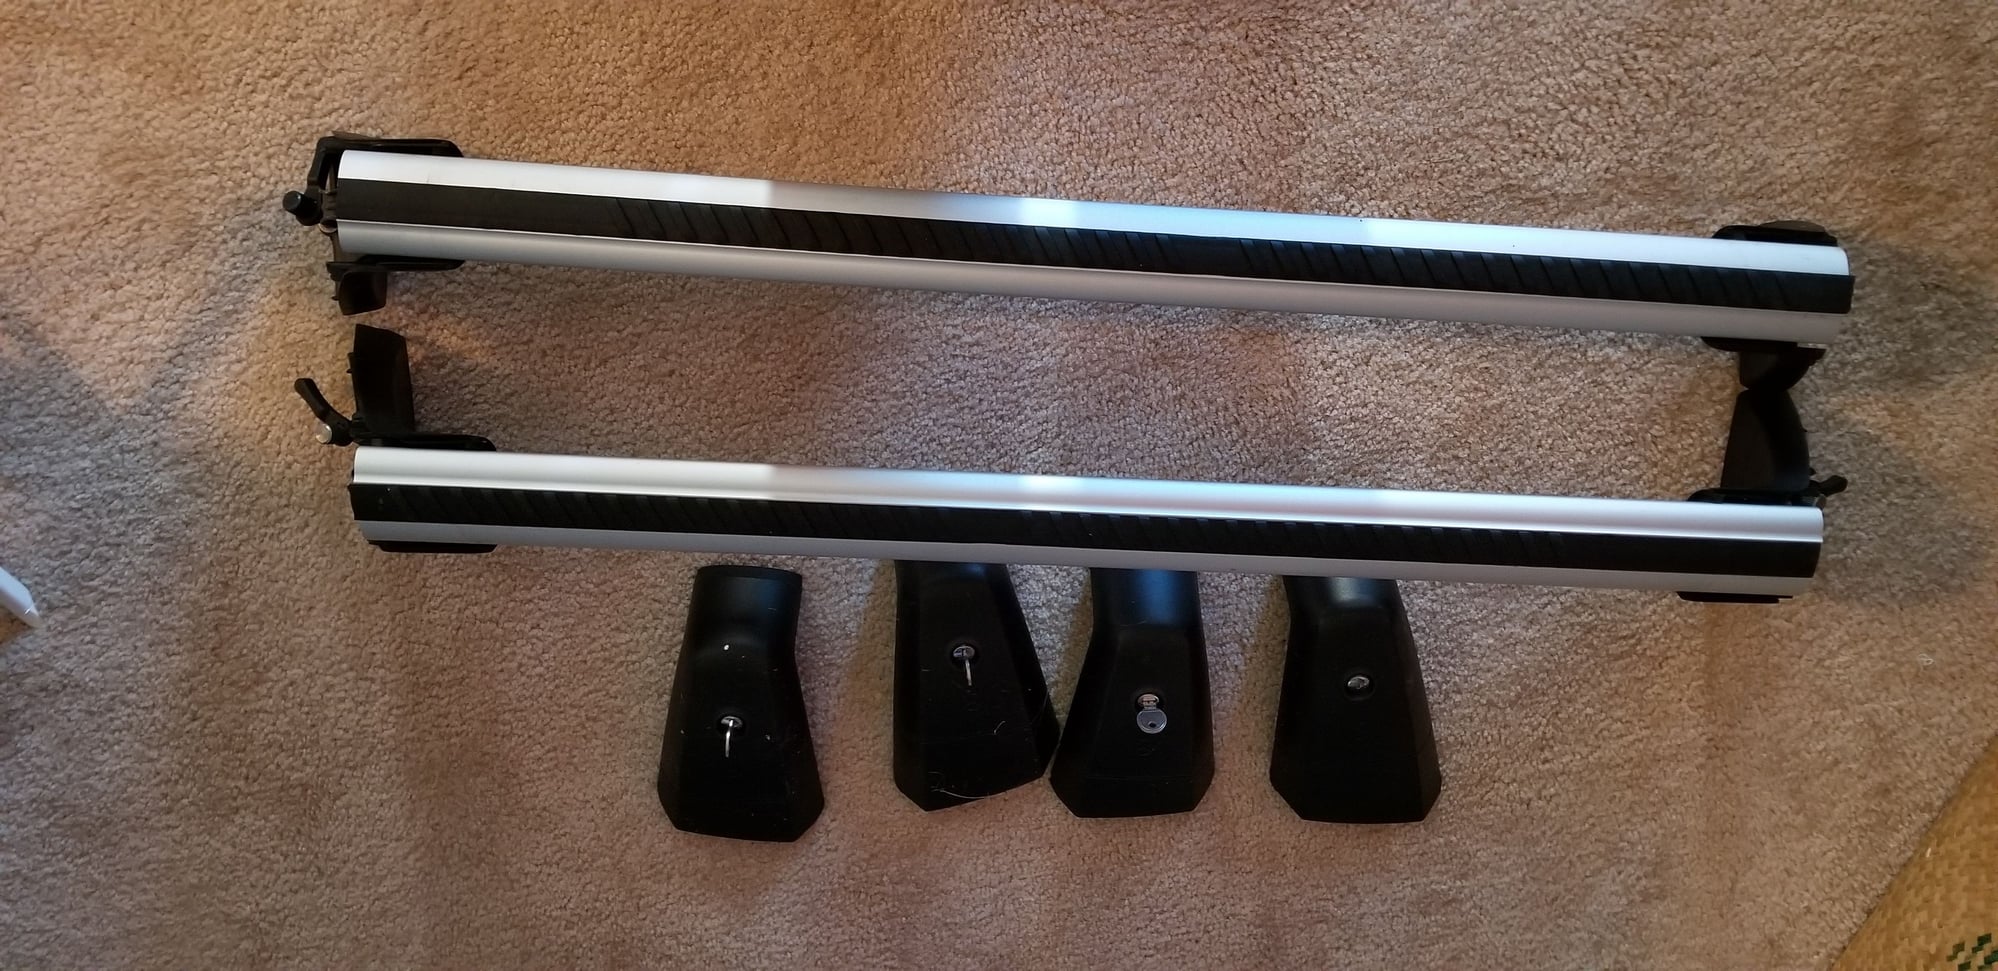 Miscellaneous - W204 Roof Rack - basic carrier for sale - Used - 2012 to 2014 Mercedes-Benz C250 - Bear, DE 19701, United States